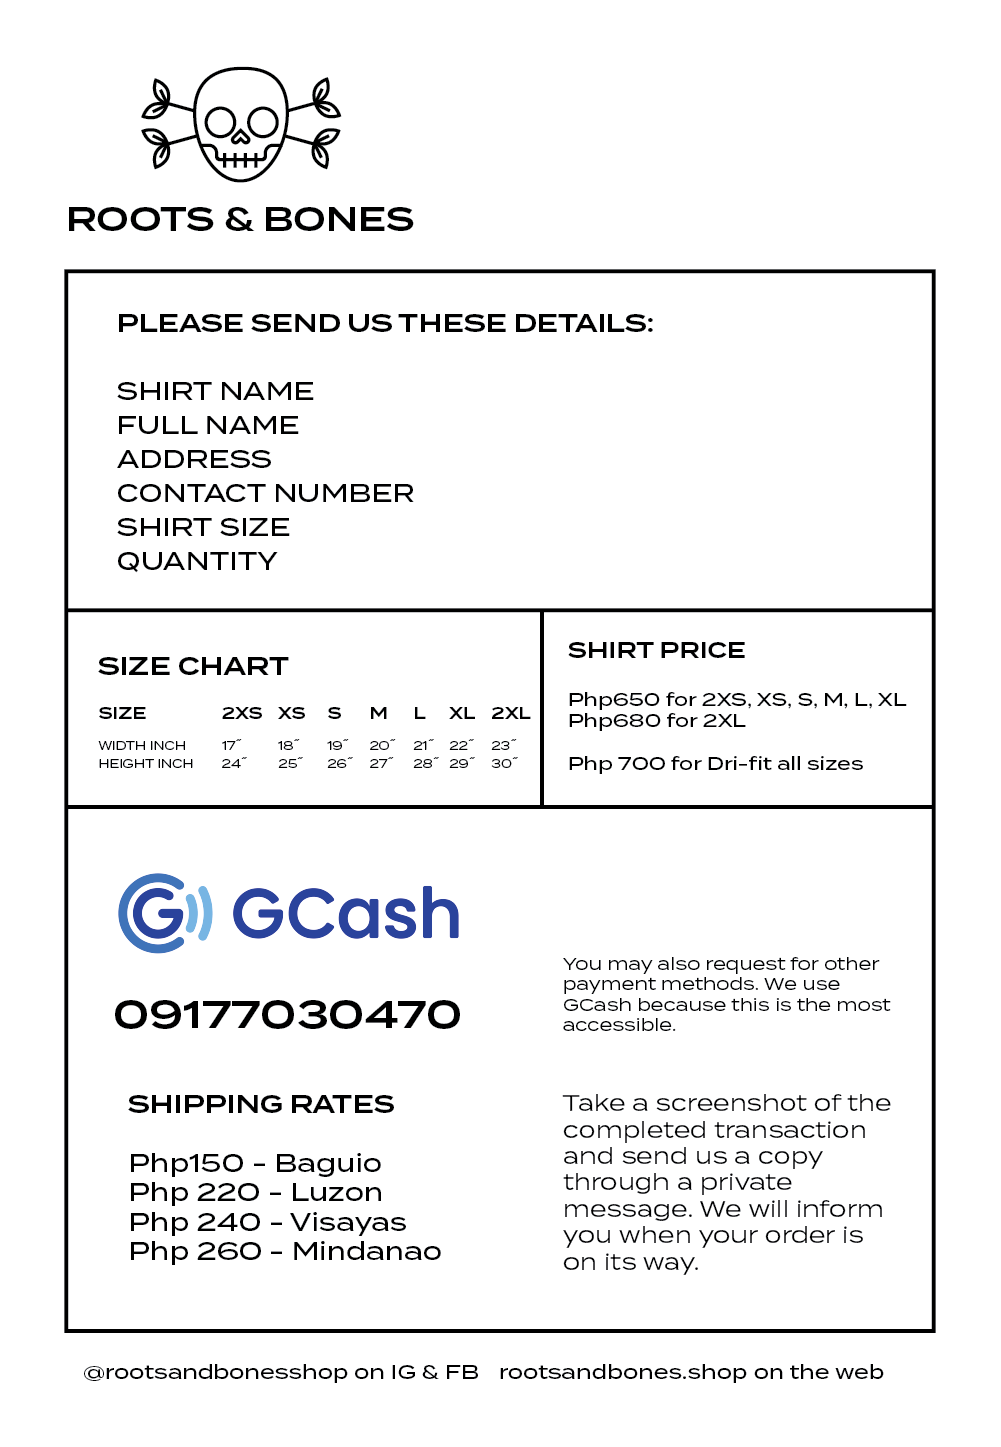 Other Payment Method